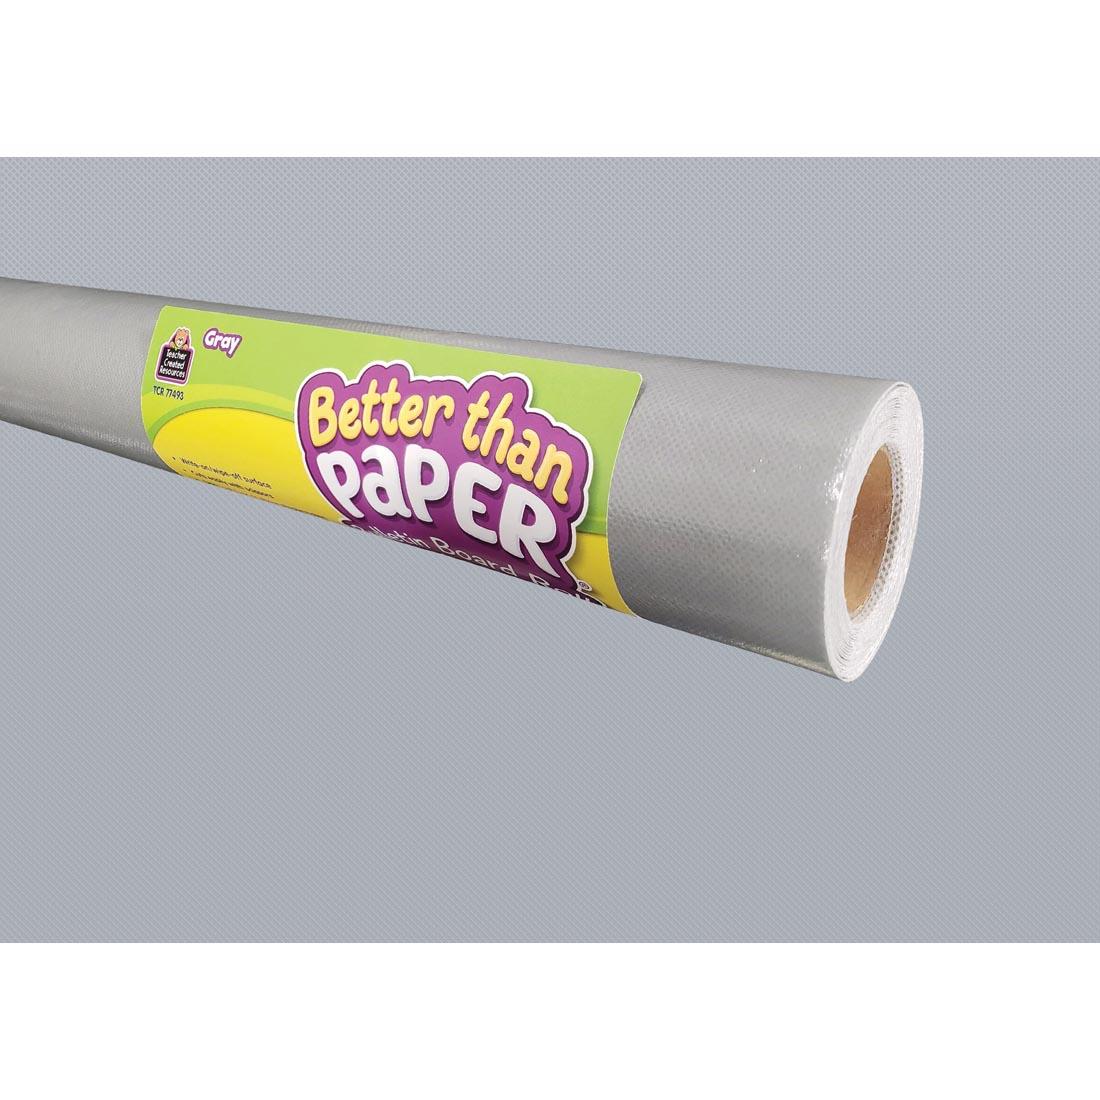 Gray Better Than Paper Bulletin Board Roll with it shown in use in the background